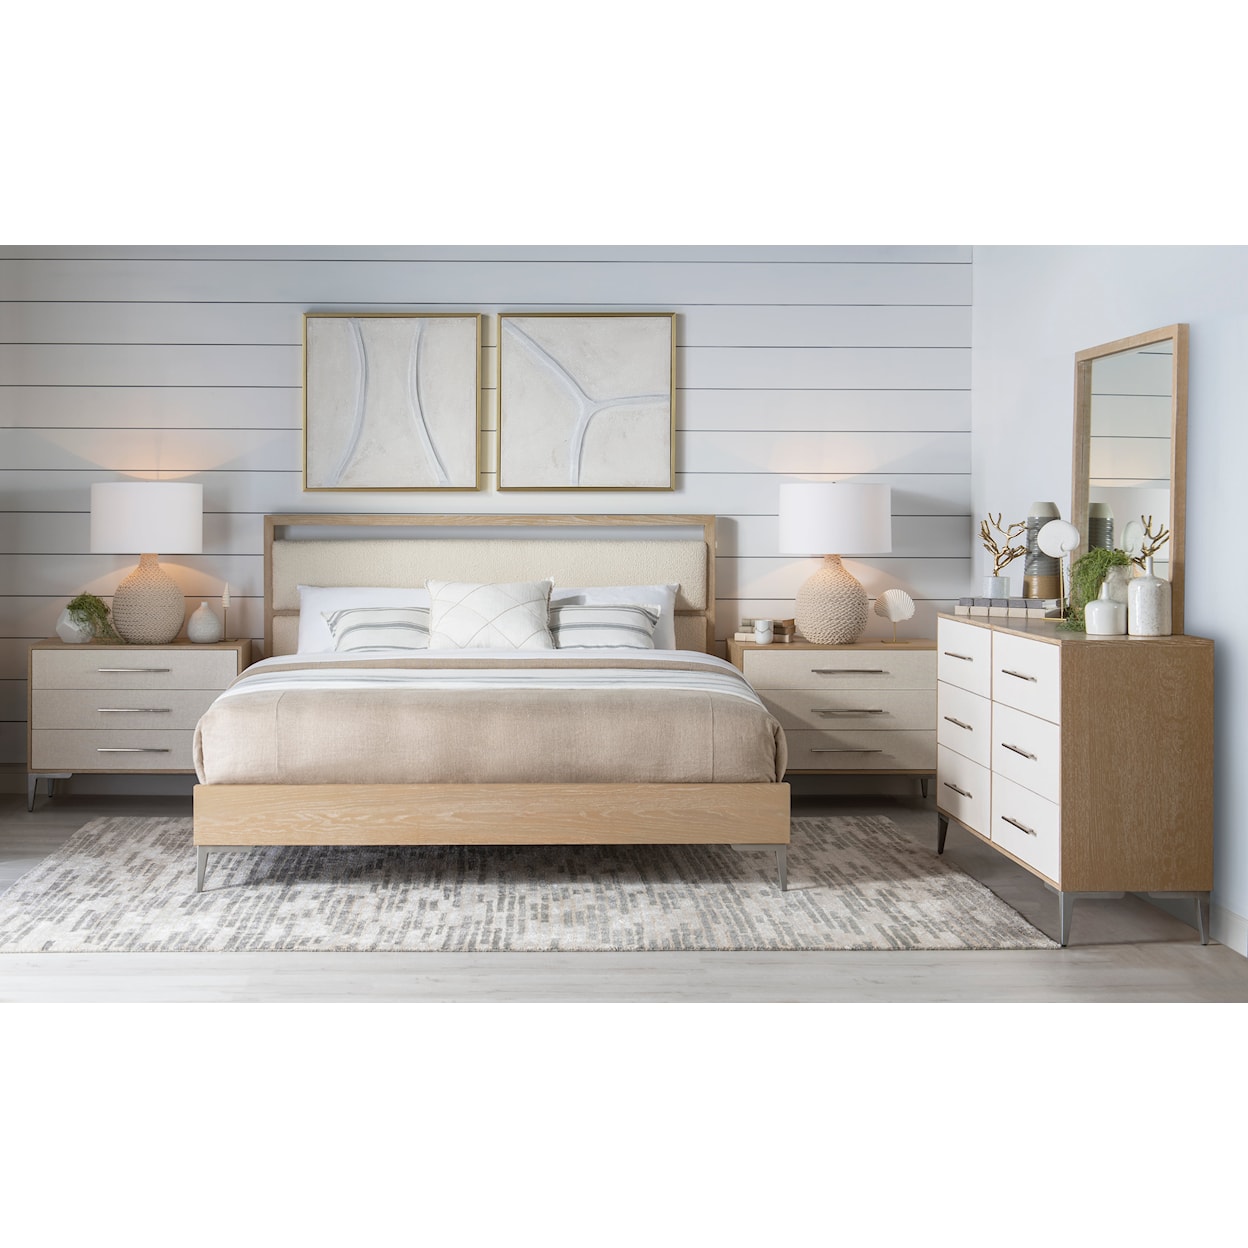 Legacy Classic Biscayne Upholstered Queen Panel Bed